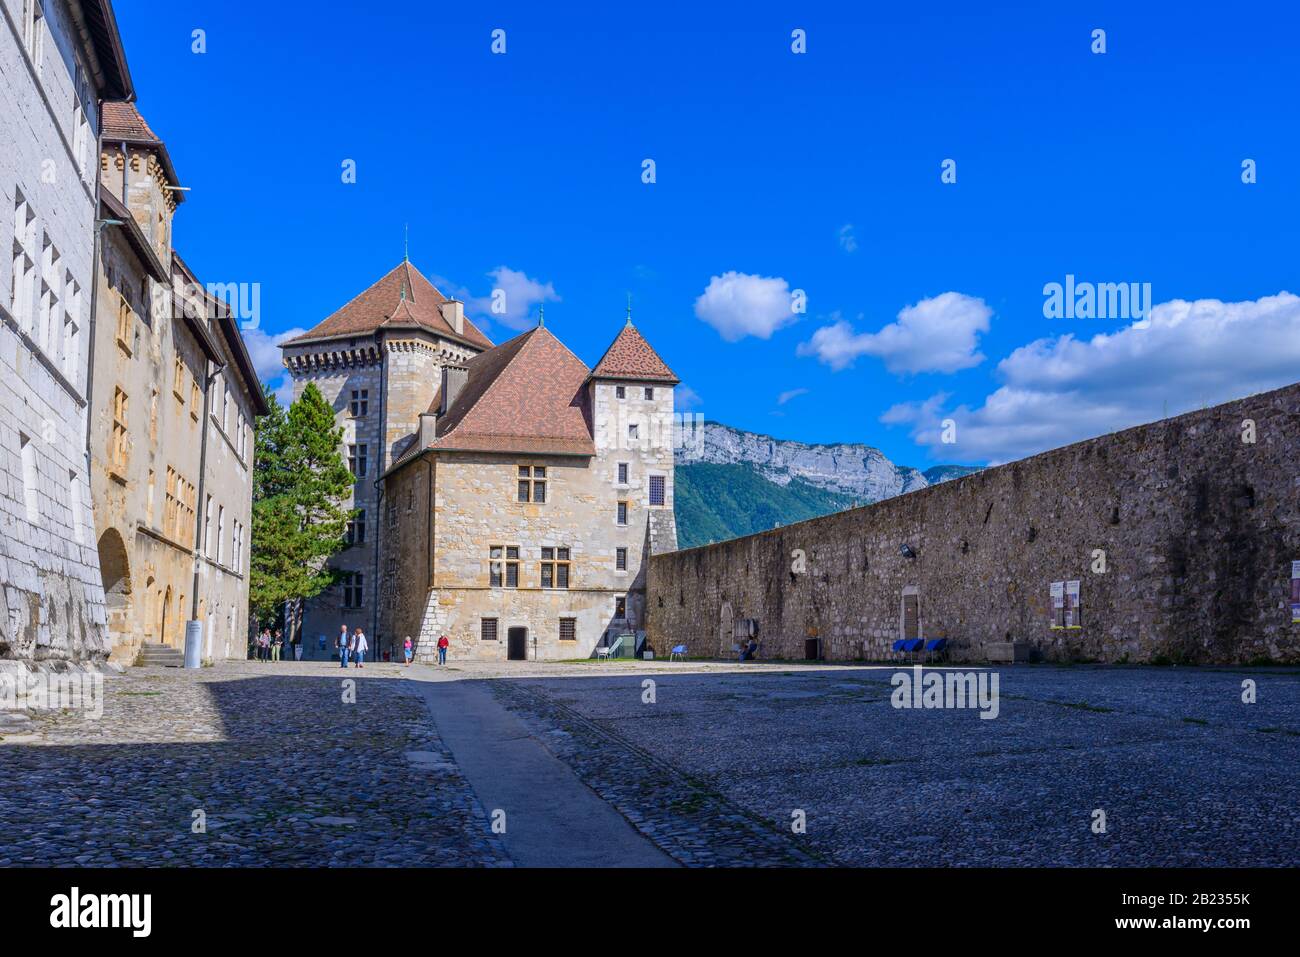 Château d'Annecy, a castle which dominates the old town of Annecy, France, which has been restored and transformed into a museum by the town. Stock Photo